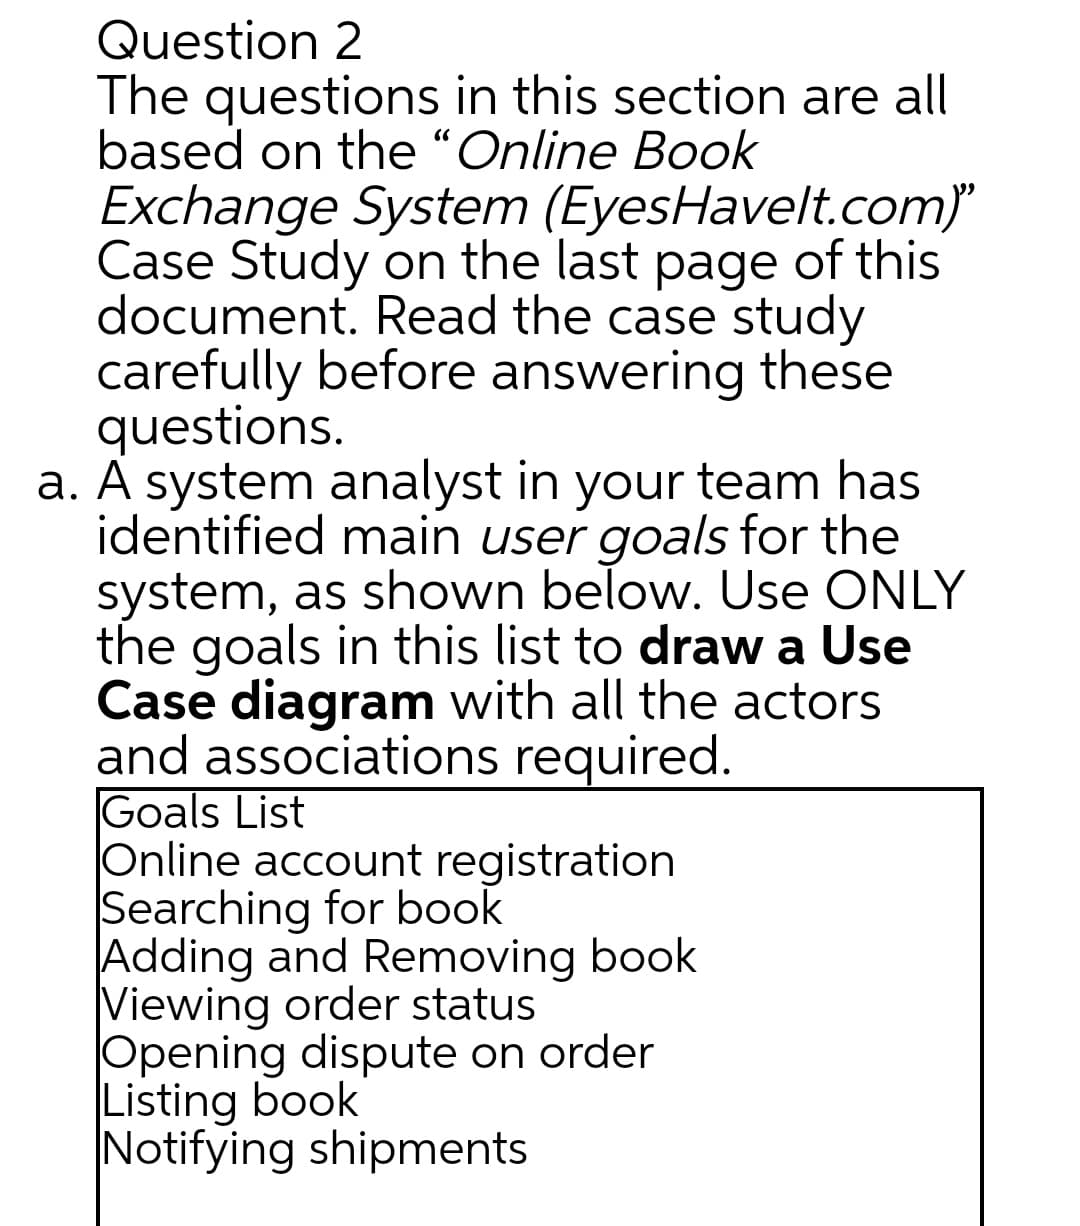 Question 2
The questions in this section are all
based on the “Online Book
Exchange System (EyesHavelt.com)
Case Study on the last page of this
document. Read the case study
carefully before answering these
questions.
a. A system analyst in your team has
identified main user goals for the
system, as shown below. Use ONLY
the goals in this list to draw a Use
Case diagram with all the actors
and associations required.
Goals List
Online account registration
Searching for book
Adding and Removing book
Viewing order status
Opening dispute on order
Listing book
Notifying shipments
